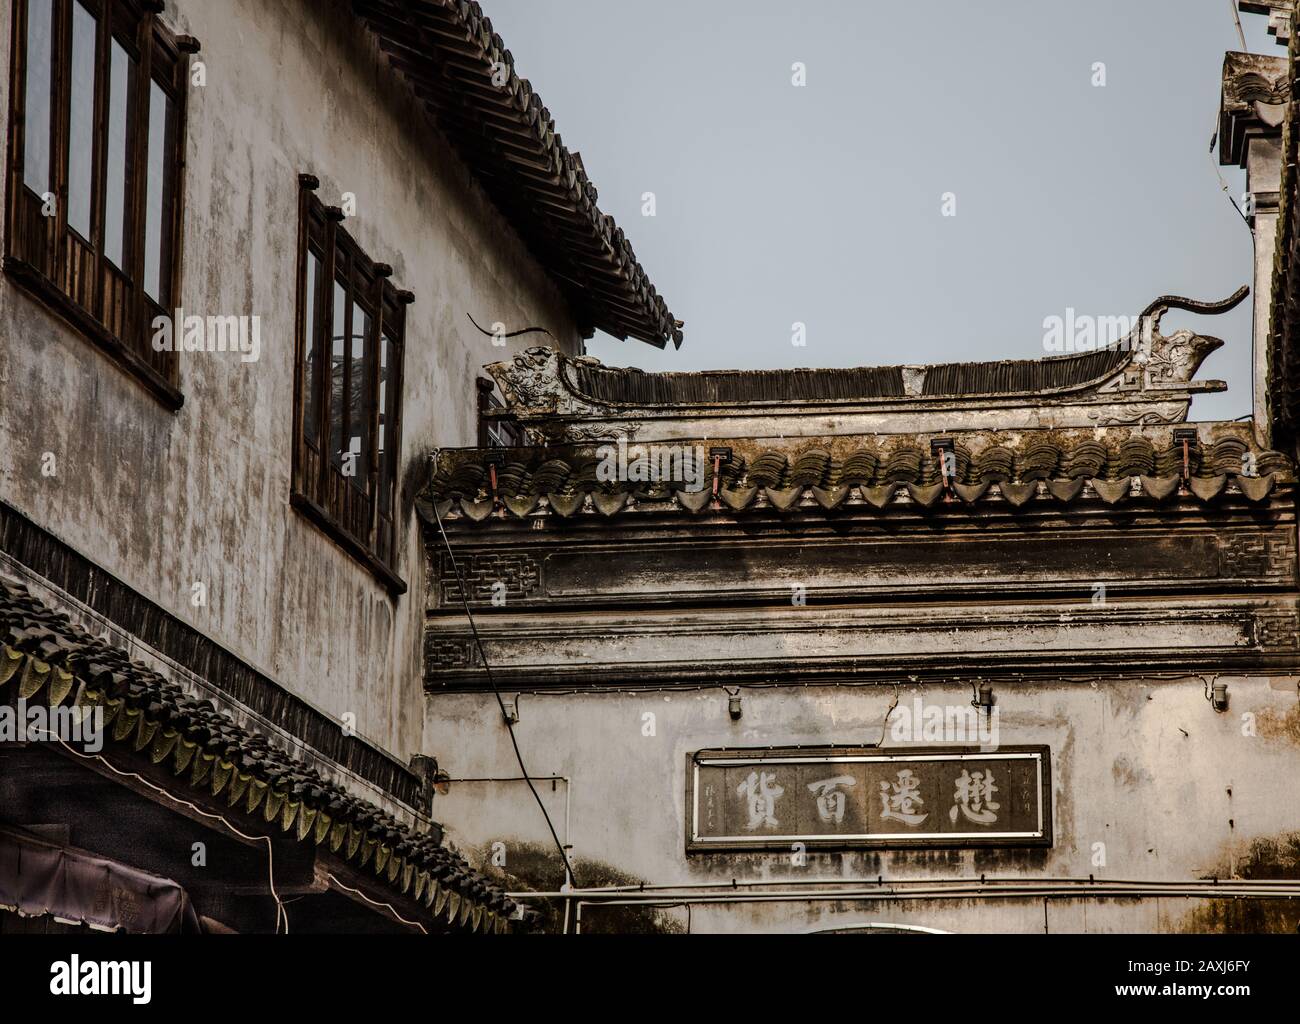 The streets and building in the historic water town of Tongi-Li, near Suzhou, China Stock Photo